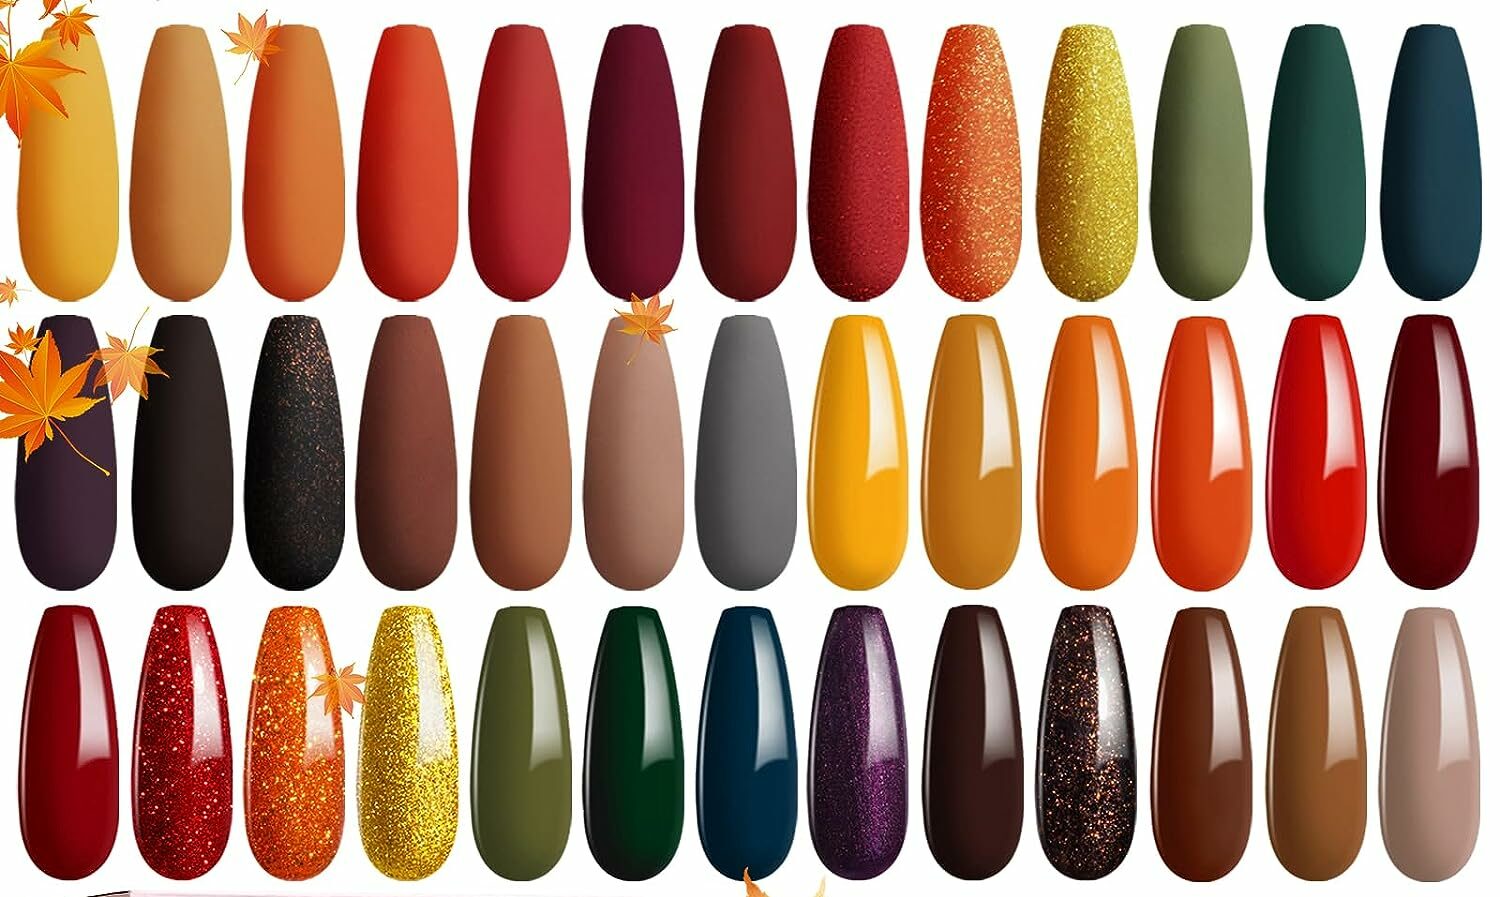 10. "Fall Nail Colors That Bring Out the Warmth in Tan Skin" - wide 3